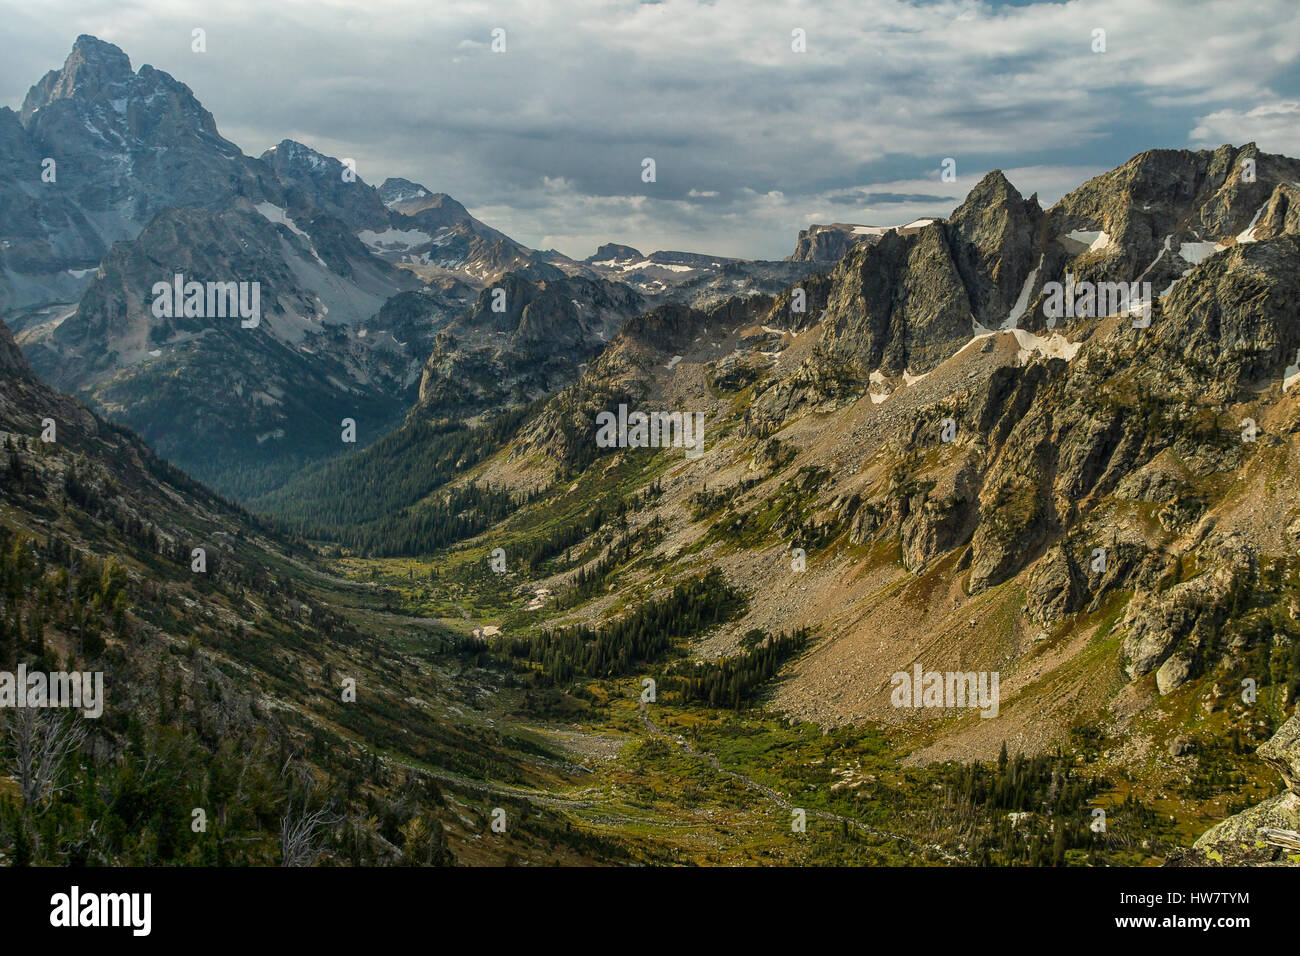 Grand Teton and the North Fork Cascade Canyon from Paintbrush Divide, Grand Teton National Park, Wyoming. Stock Photo